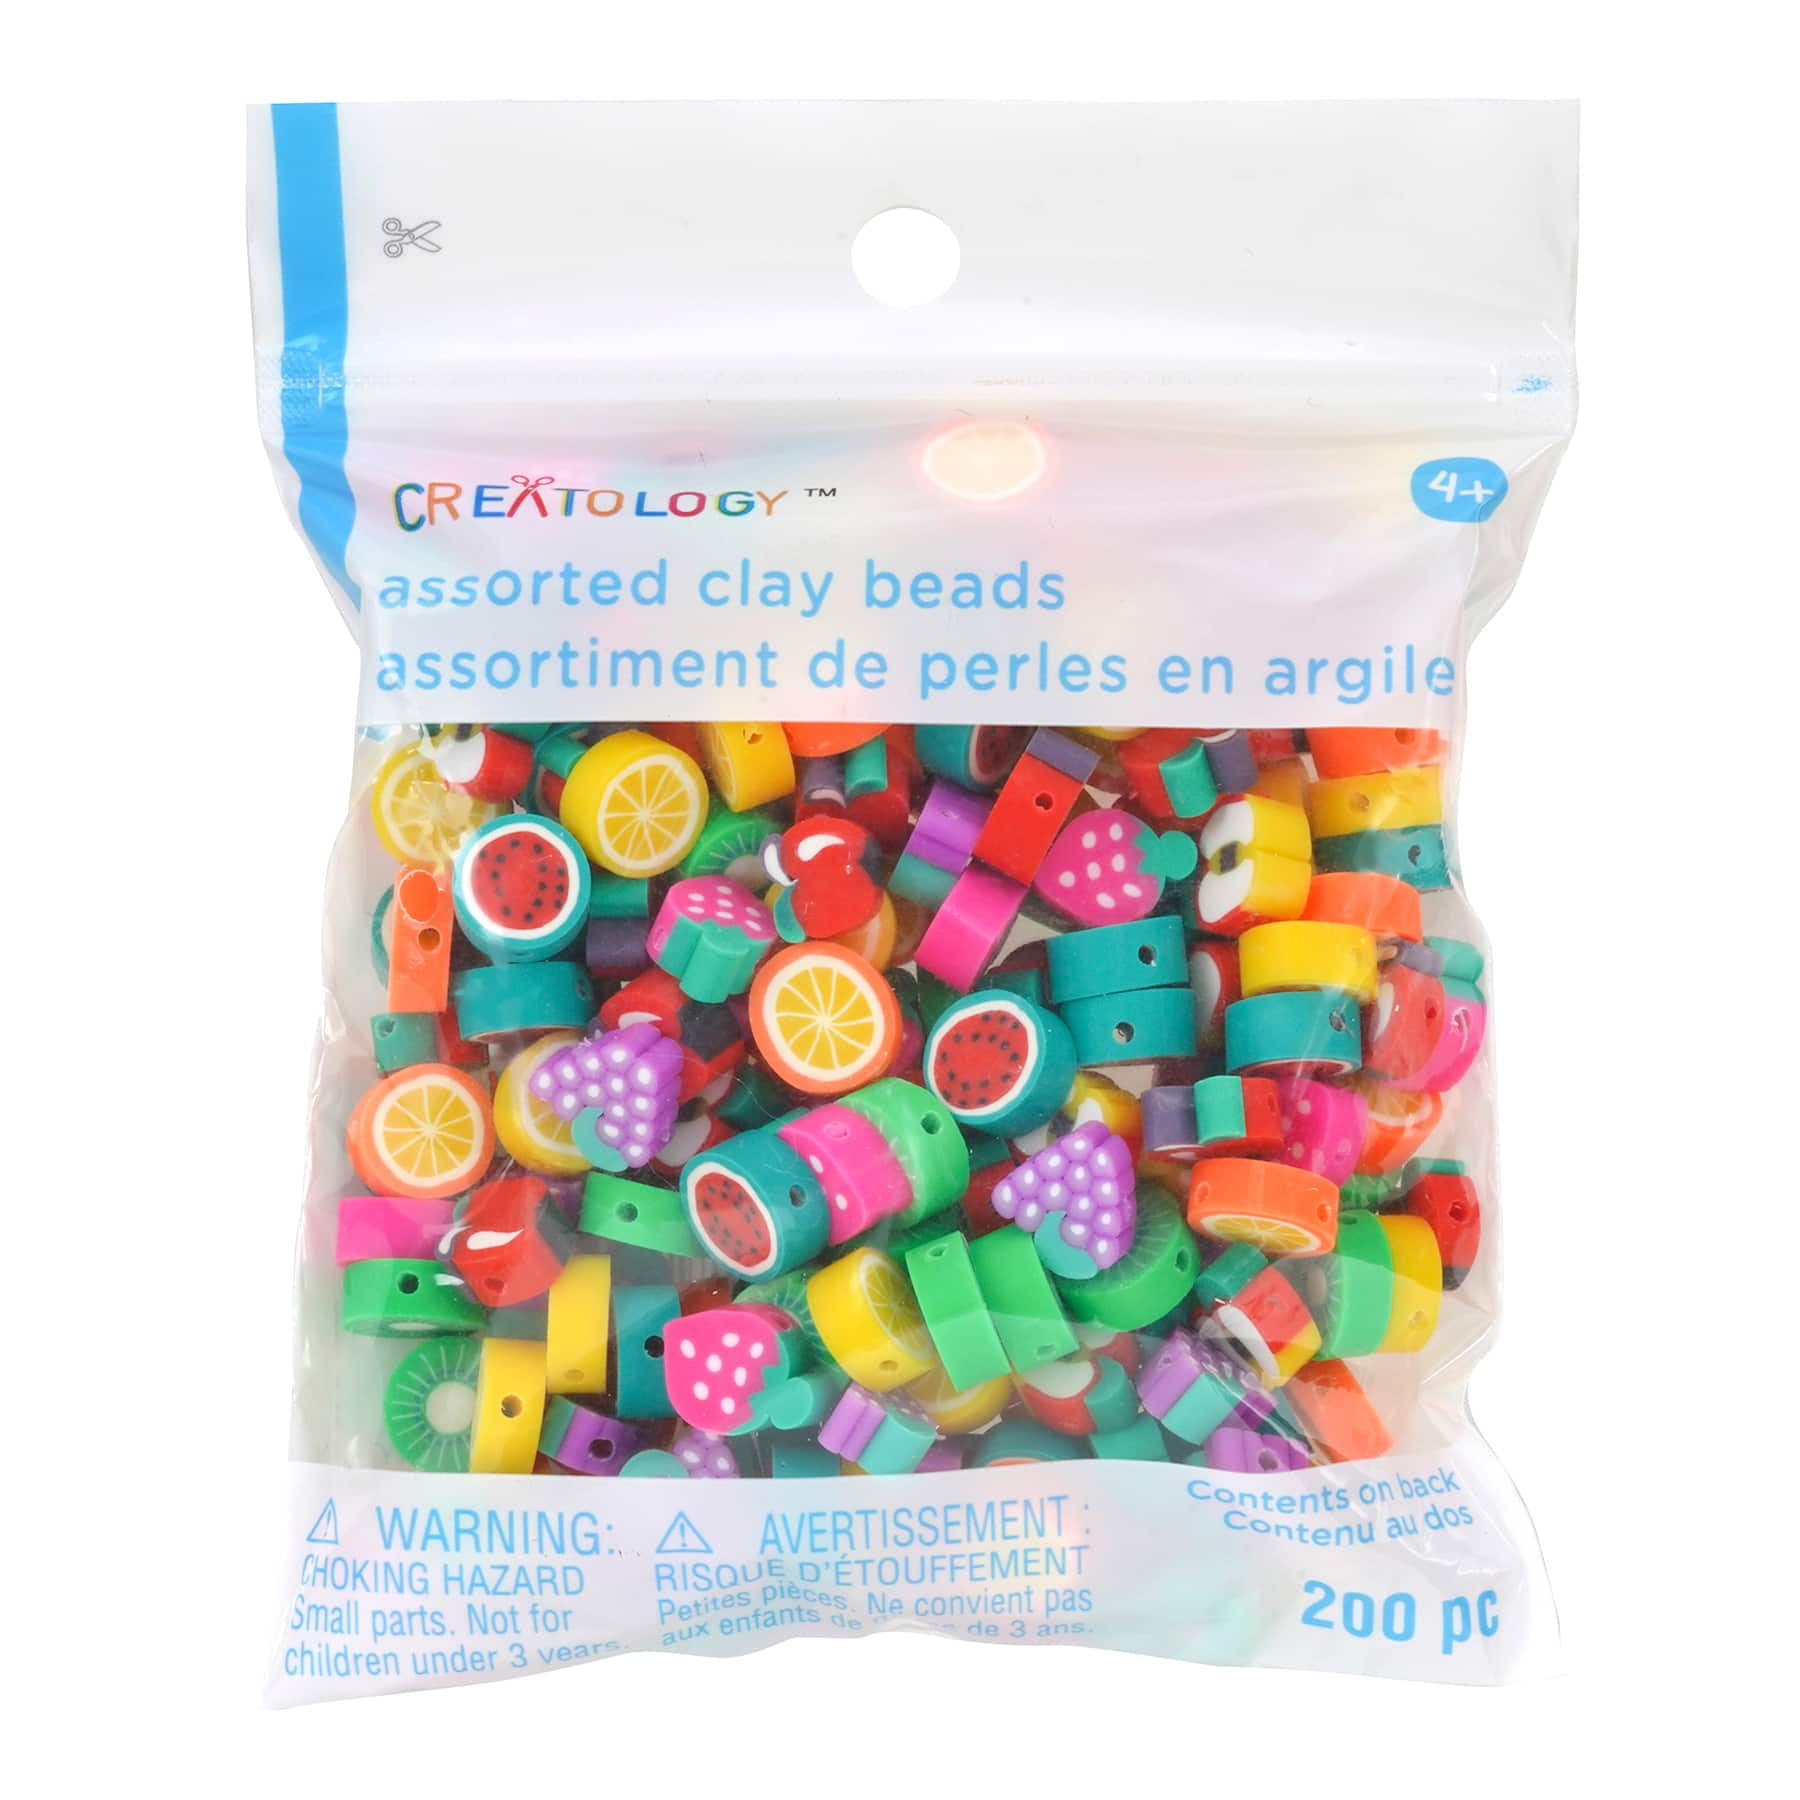 12 Packs: 500 ct. (6,000 total) Multicolored Clay Beads by Creatology™